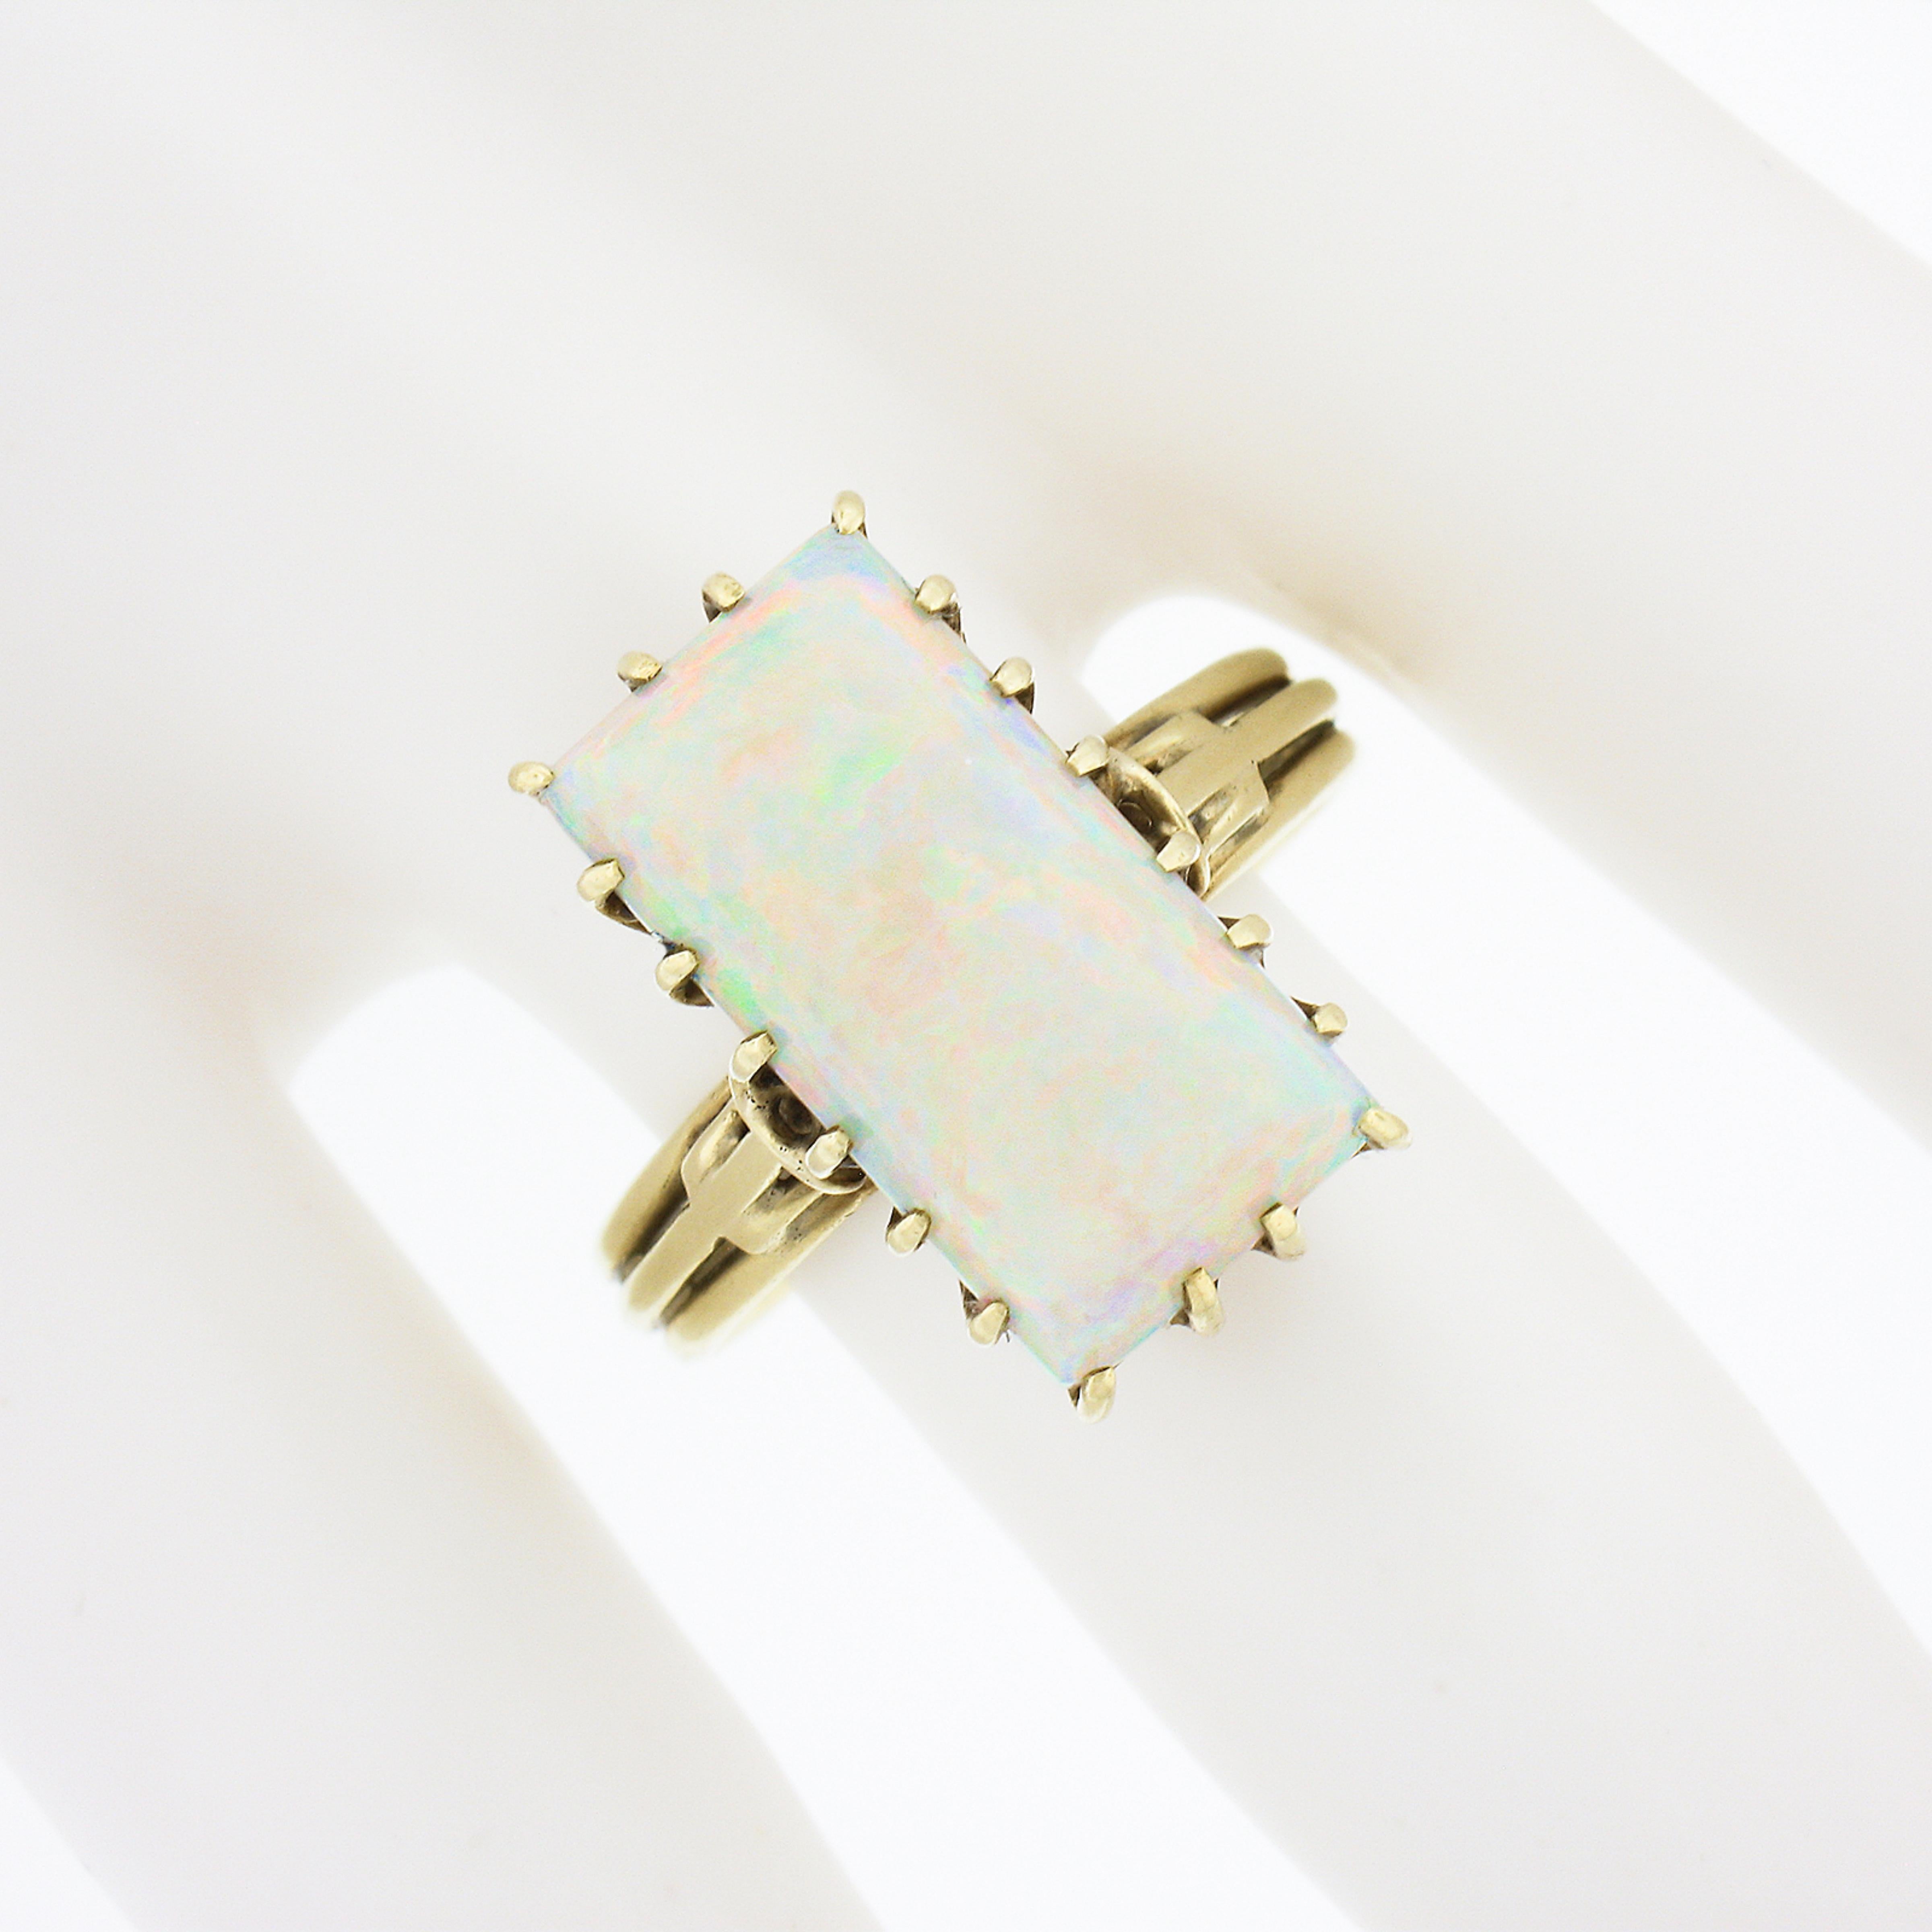 Vintage Handmade 18k Gold Rectangular Cabochon Cut Opal Solitaire Cocktail Ring In Good Condition For Sale In Montclair, NJ